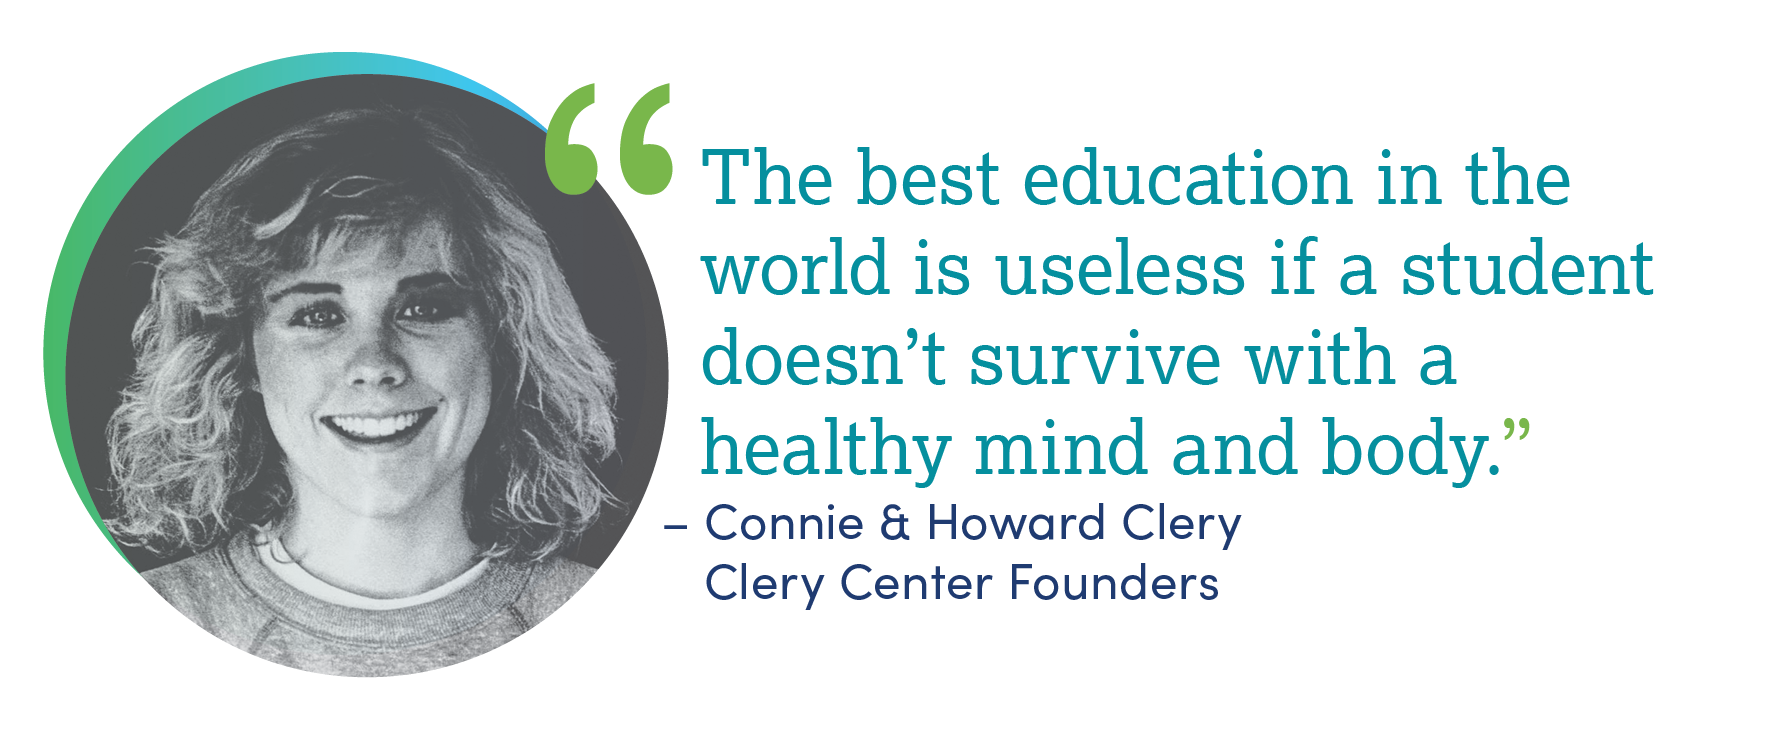 Black and white image of Jeanne Clery with the quote, "The best education in the world is useless if a student doesn’t survive with a  healthy mind and body.” – Connie & Howard, Clery Clery Center Founders